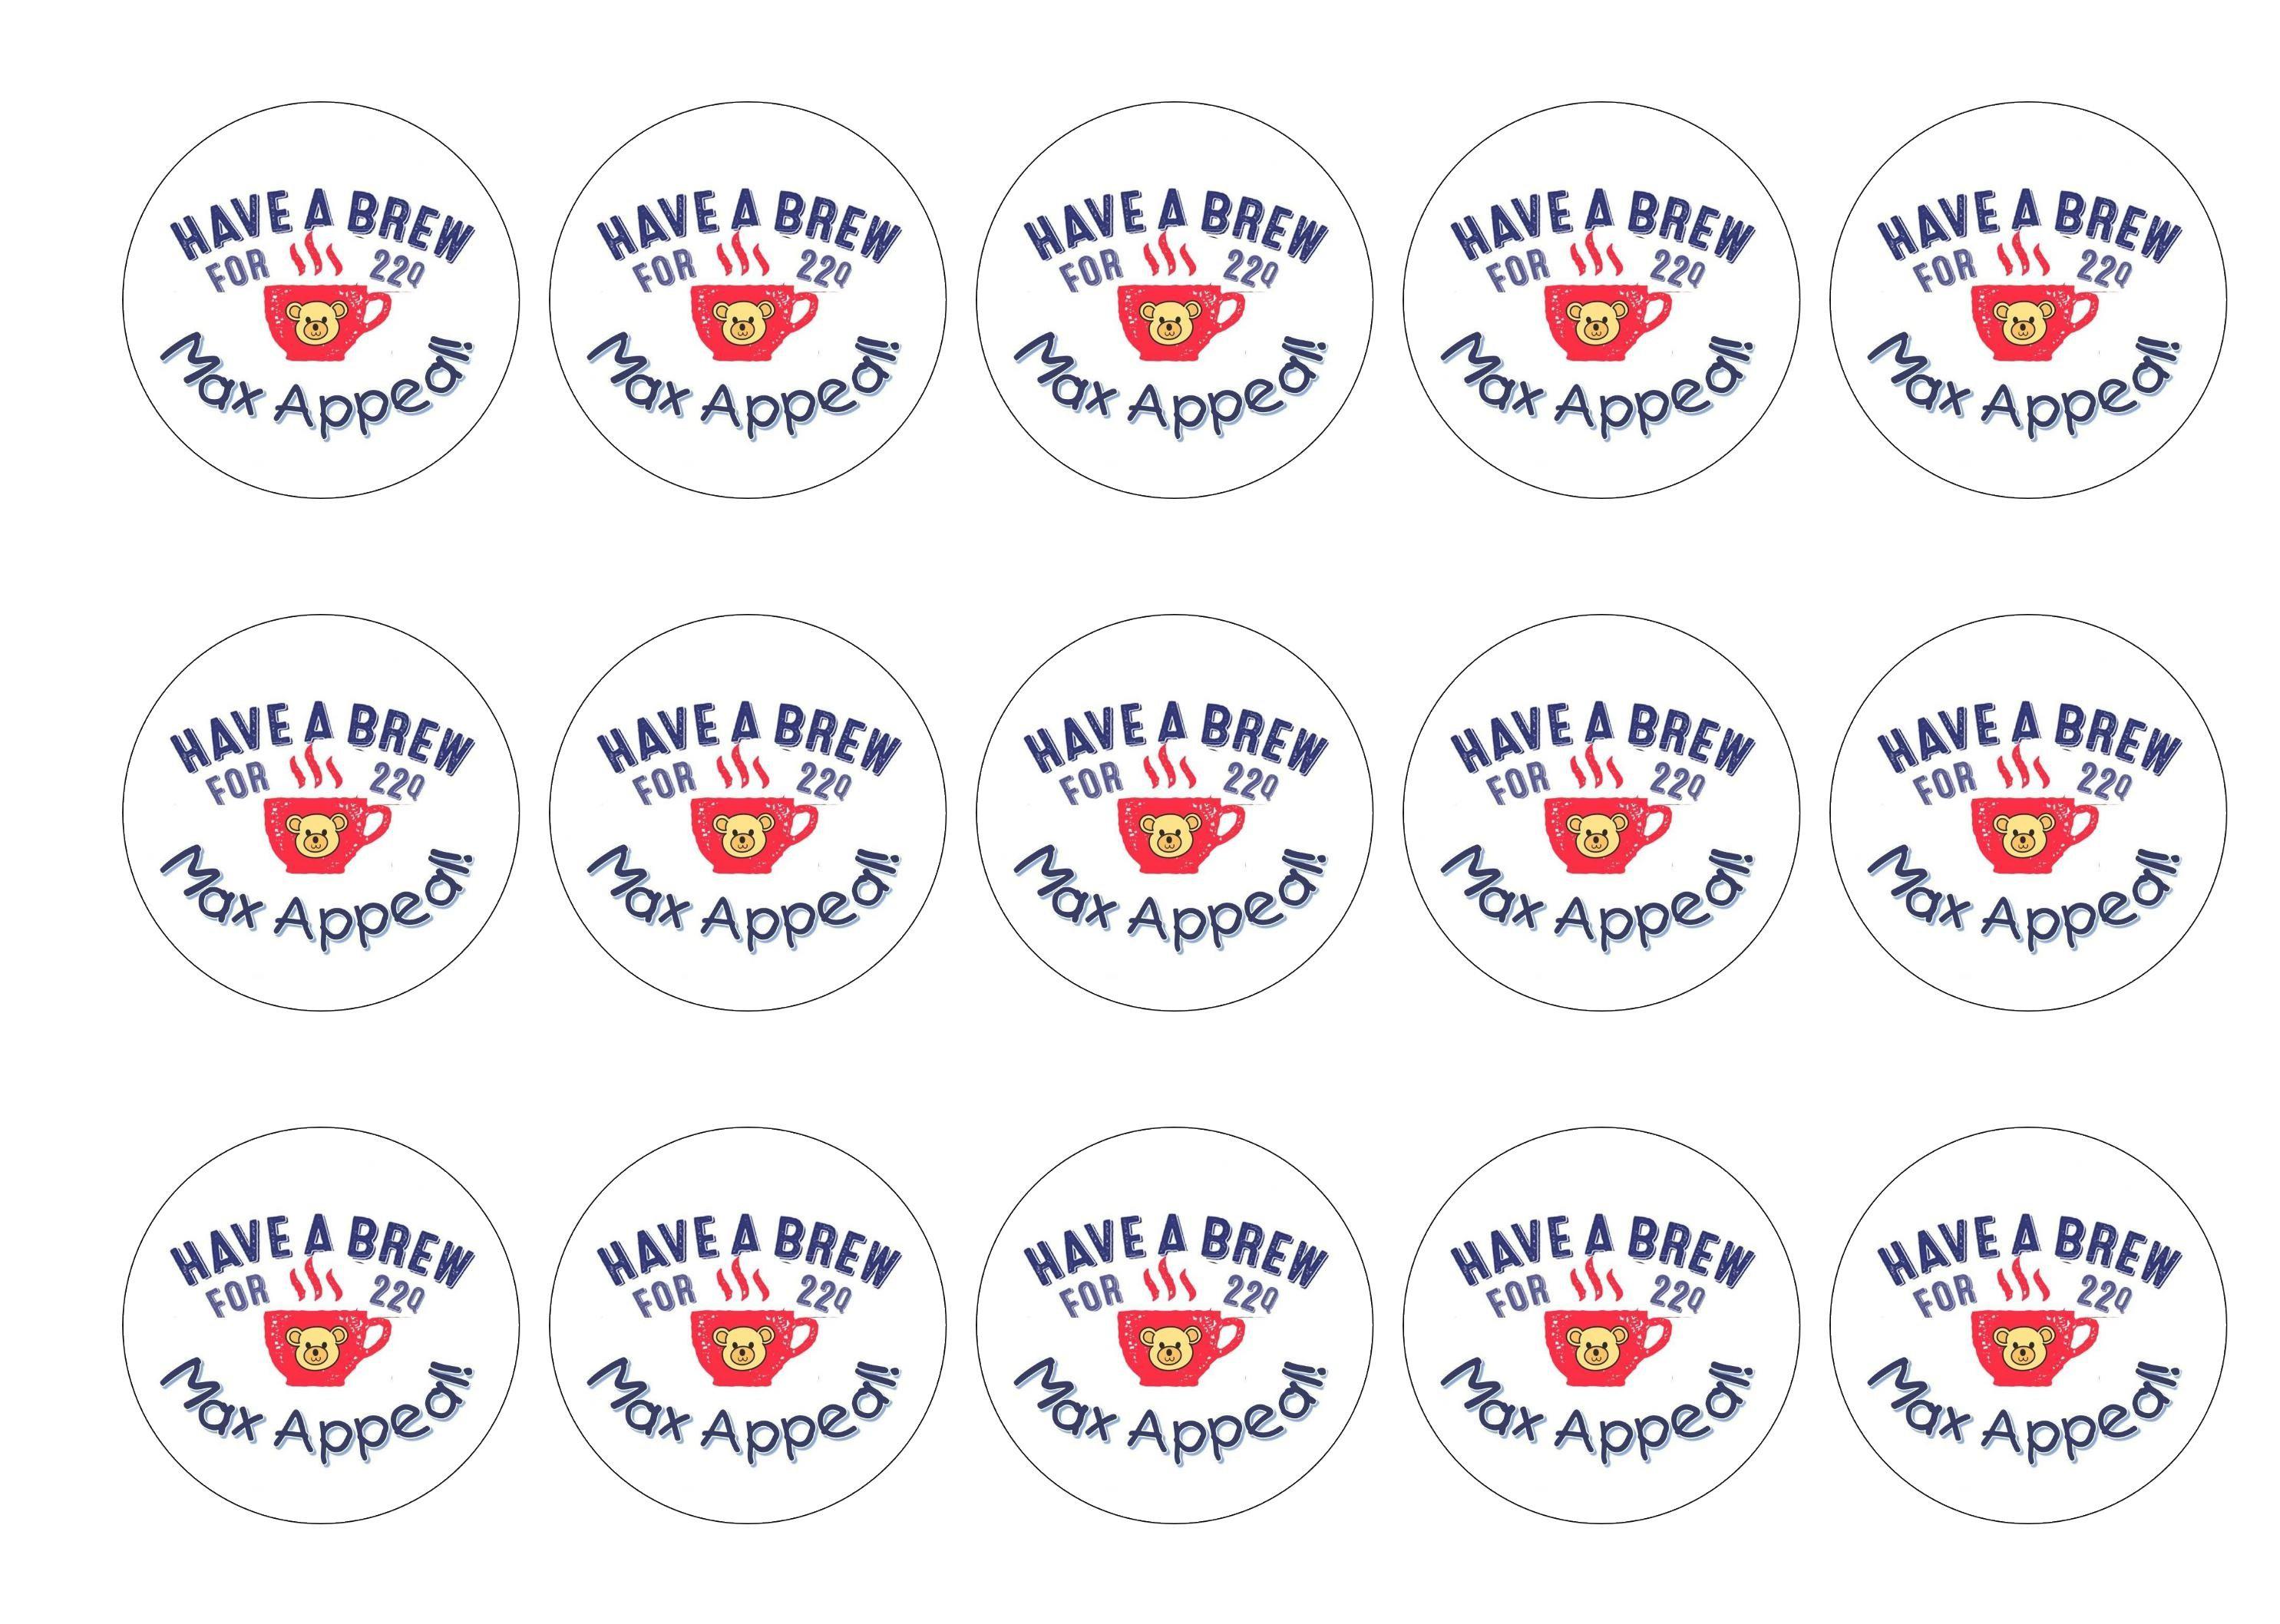 15 printed cupcake toppers for the charity Max Appeal